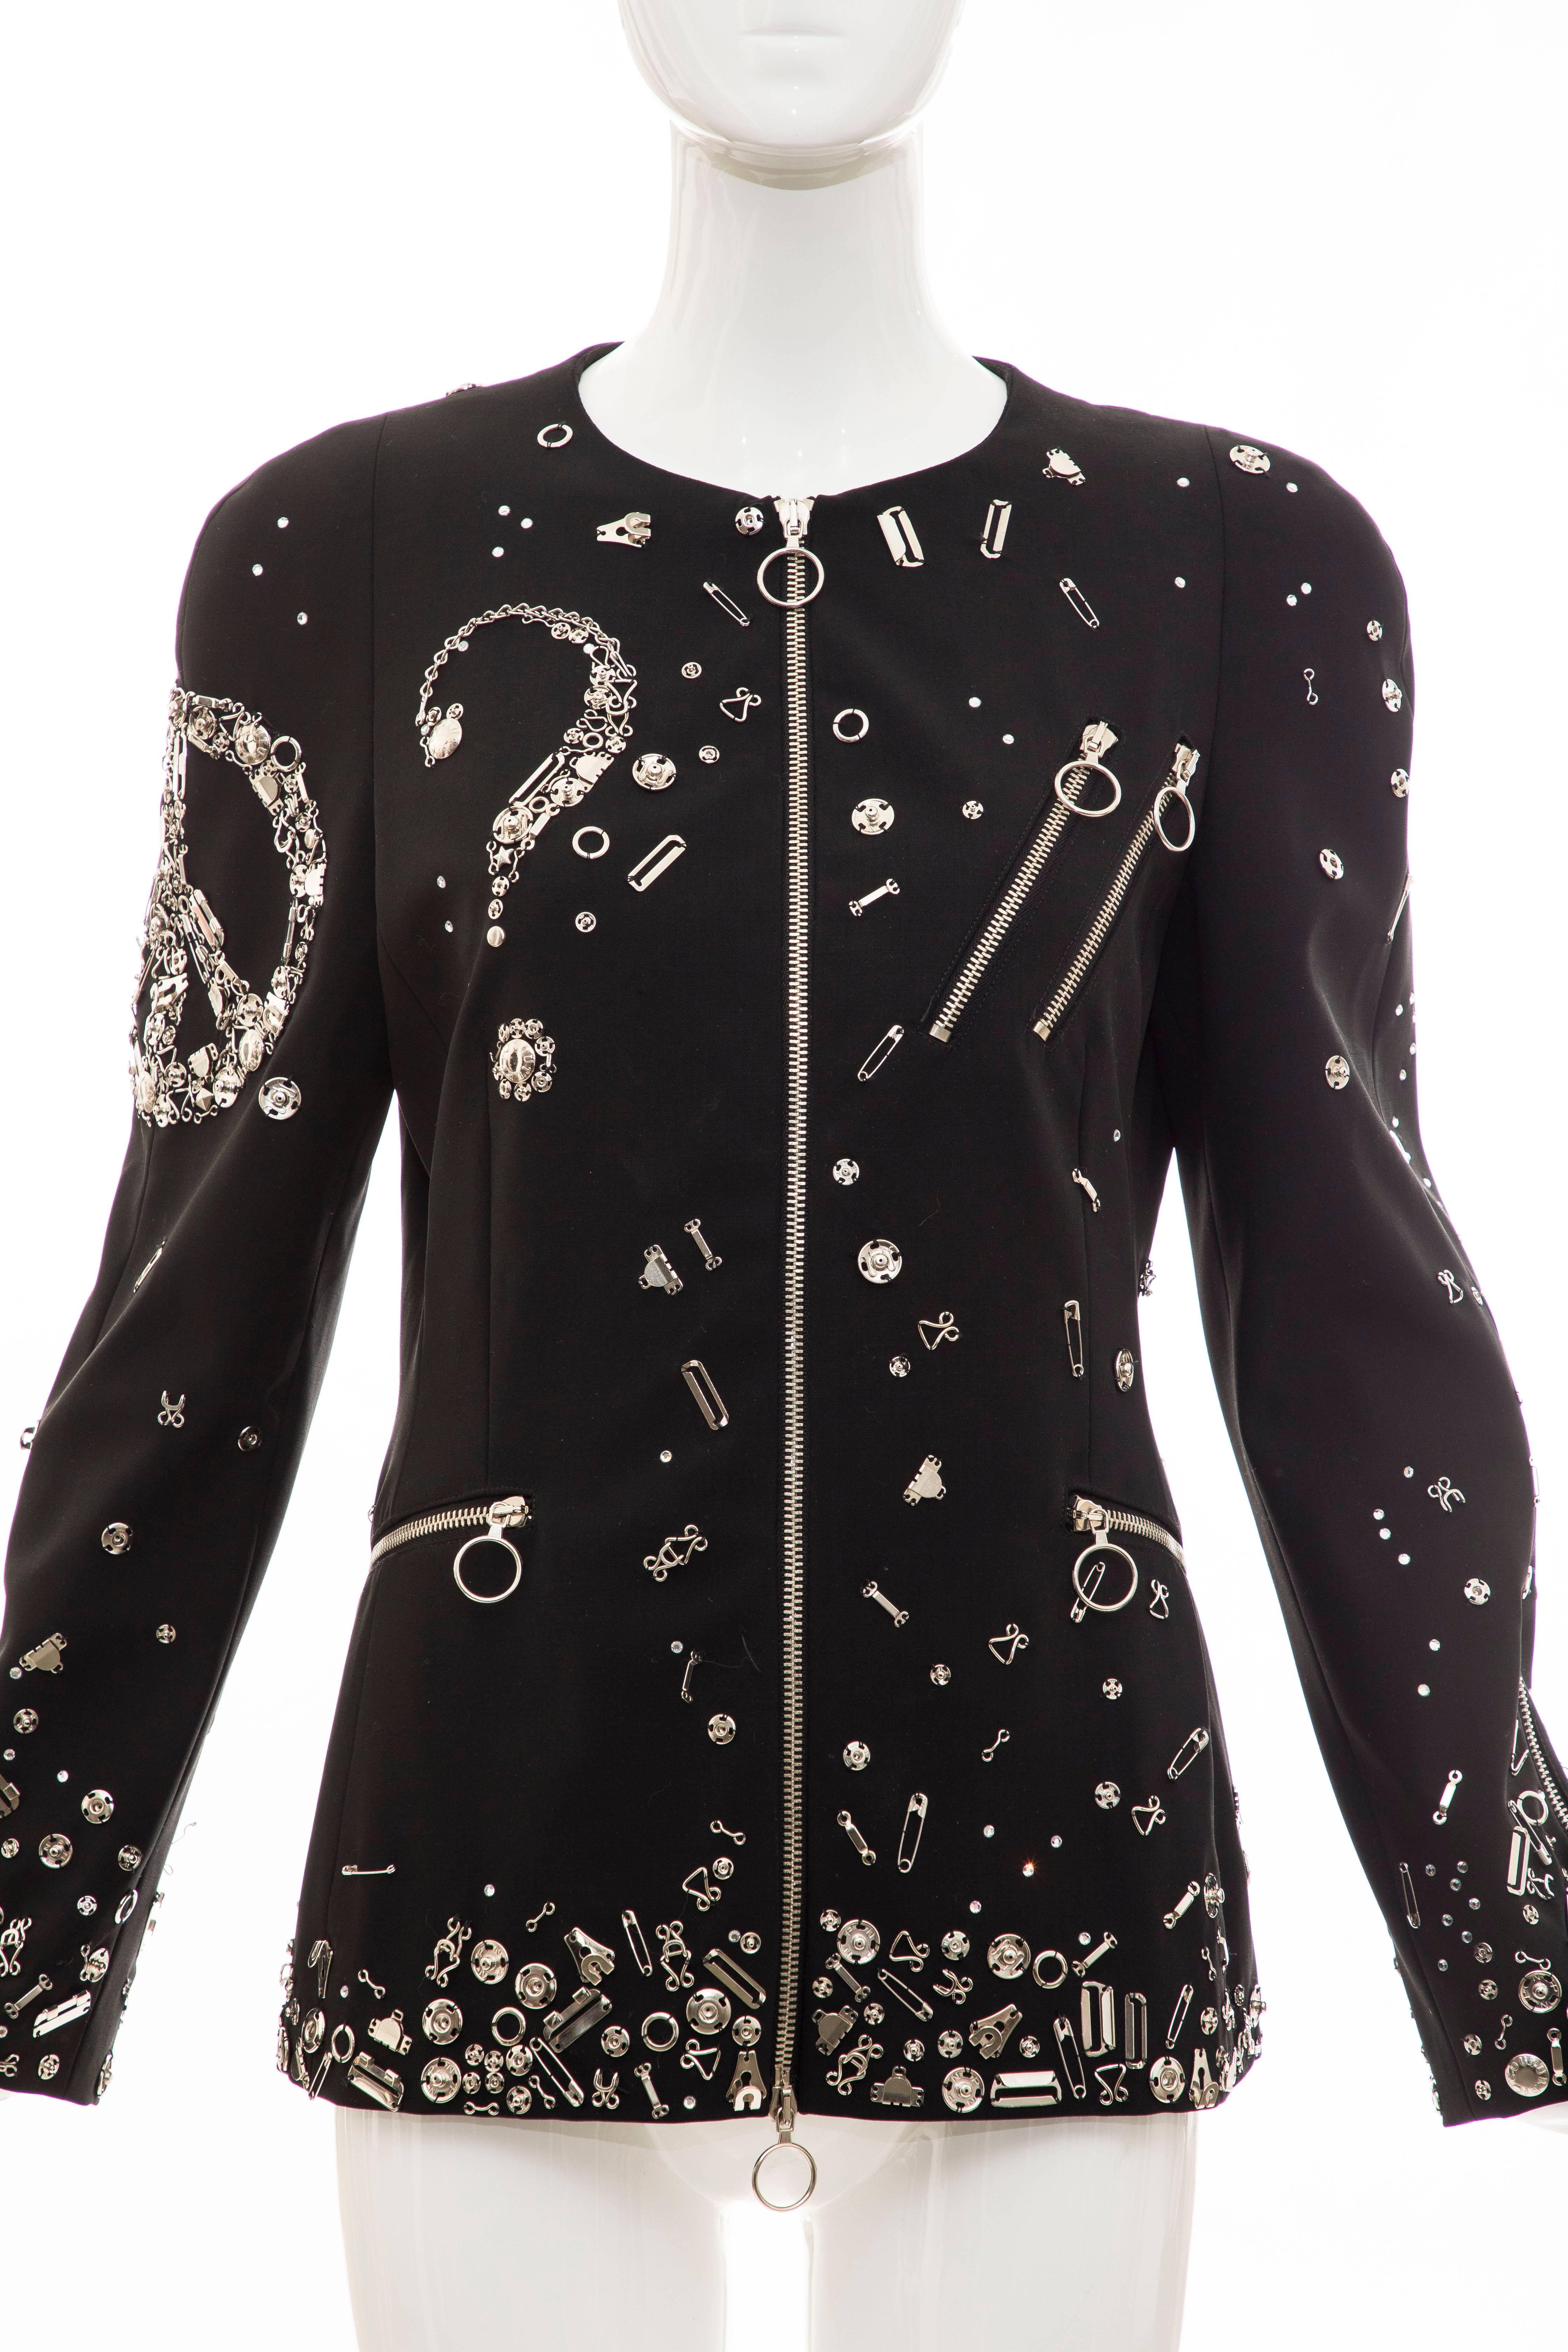 Moschino Couture Black Safety Pin Zip Front Jacket, Fall 2009 In Excellent Condition For Sale In Cincinnati, OH